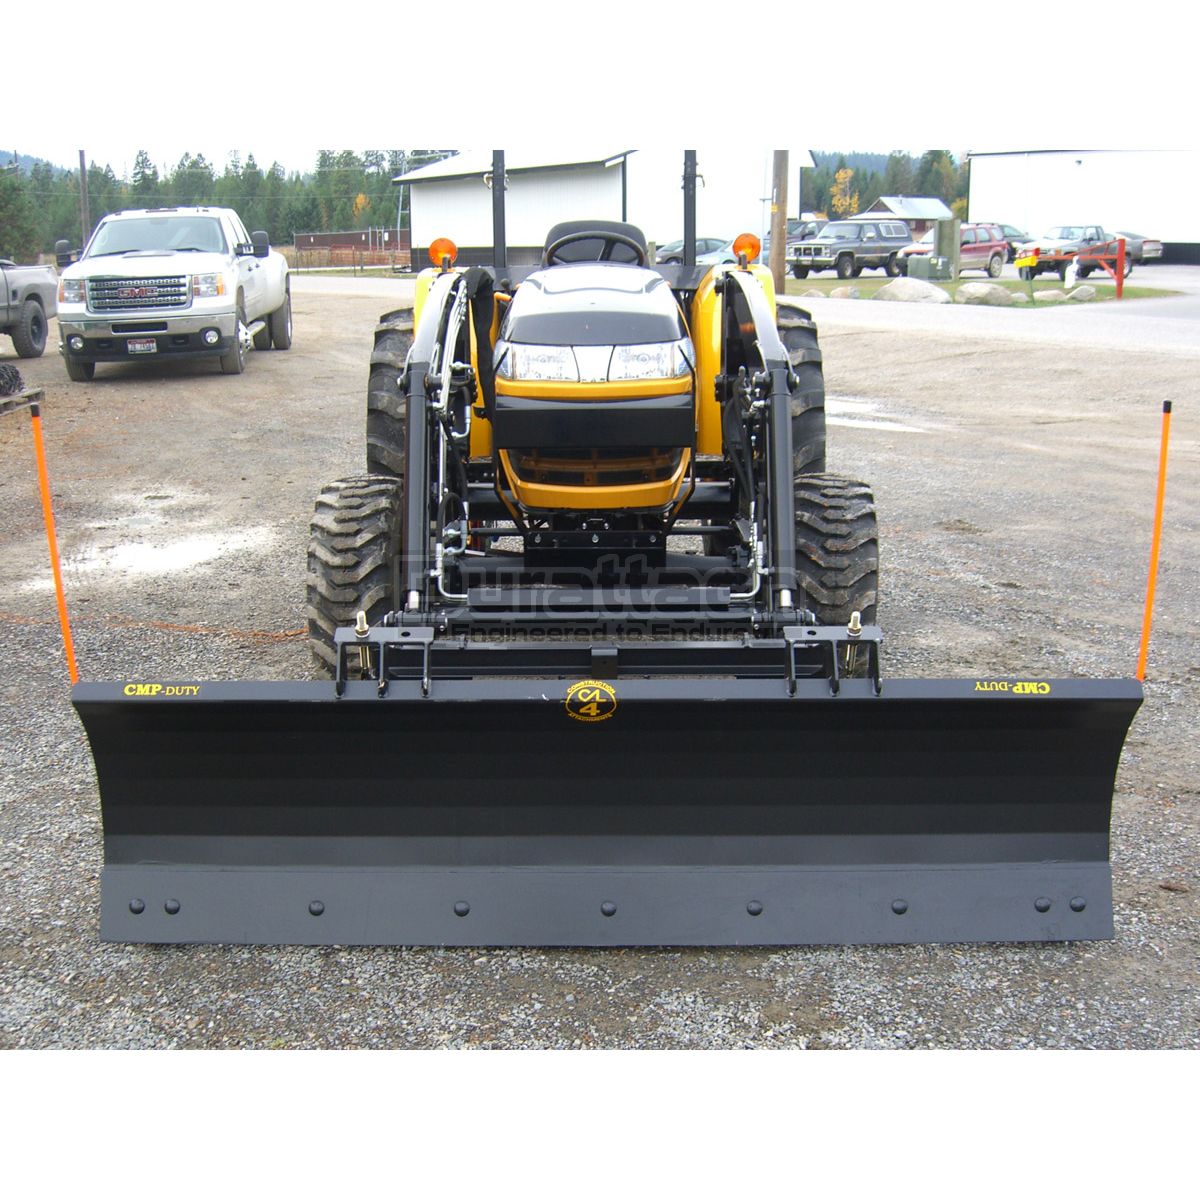 Extendable Snow Plow for Skid Steers and Mid Sized Tractors